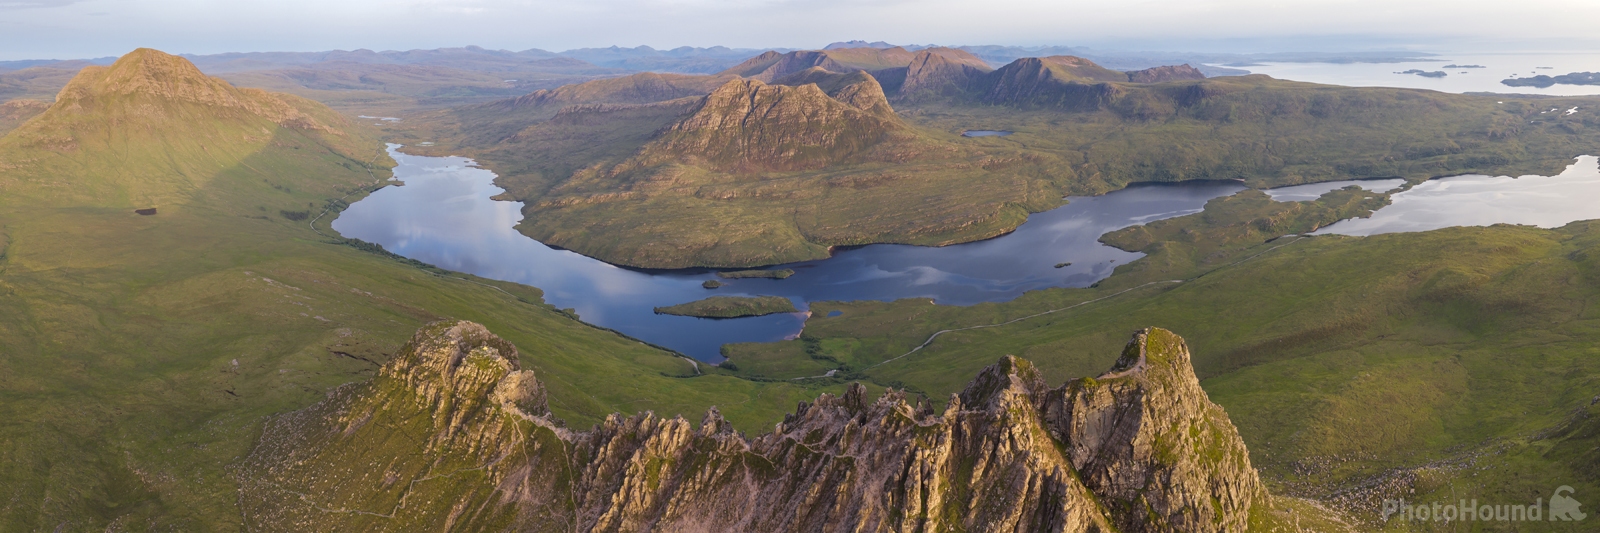 Image of Stac Pollaidh by Jeremy Woodhouse